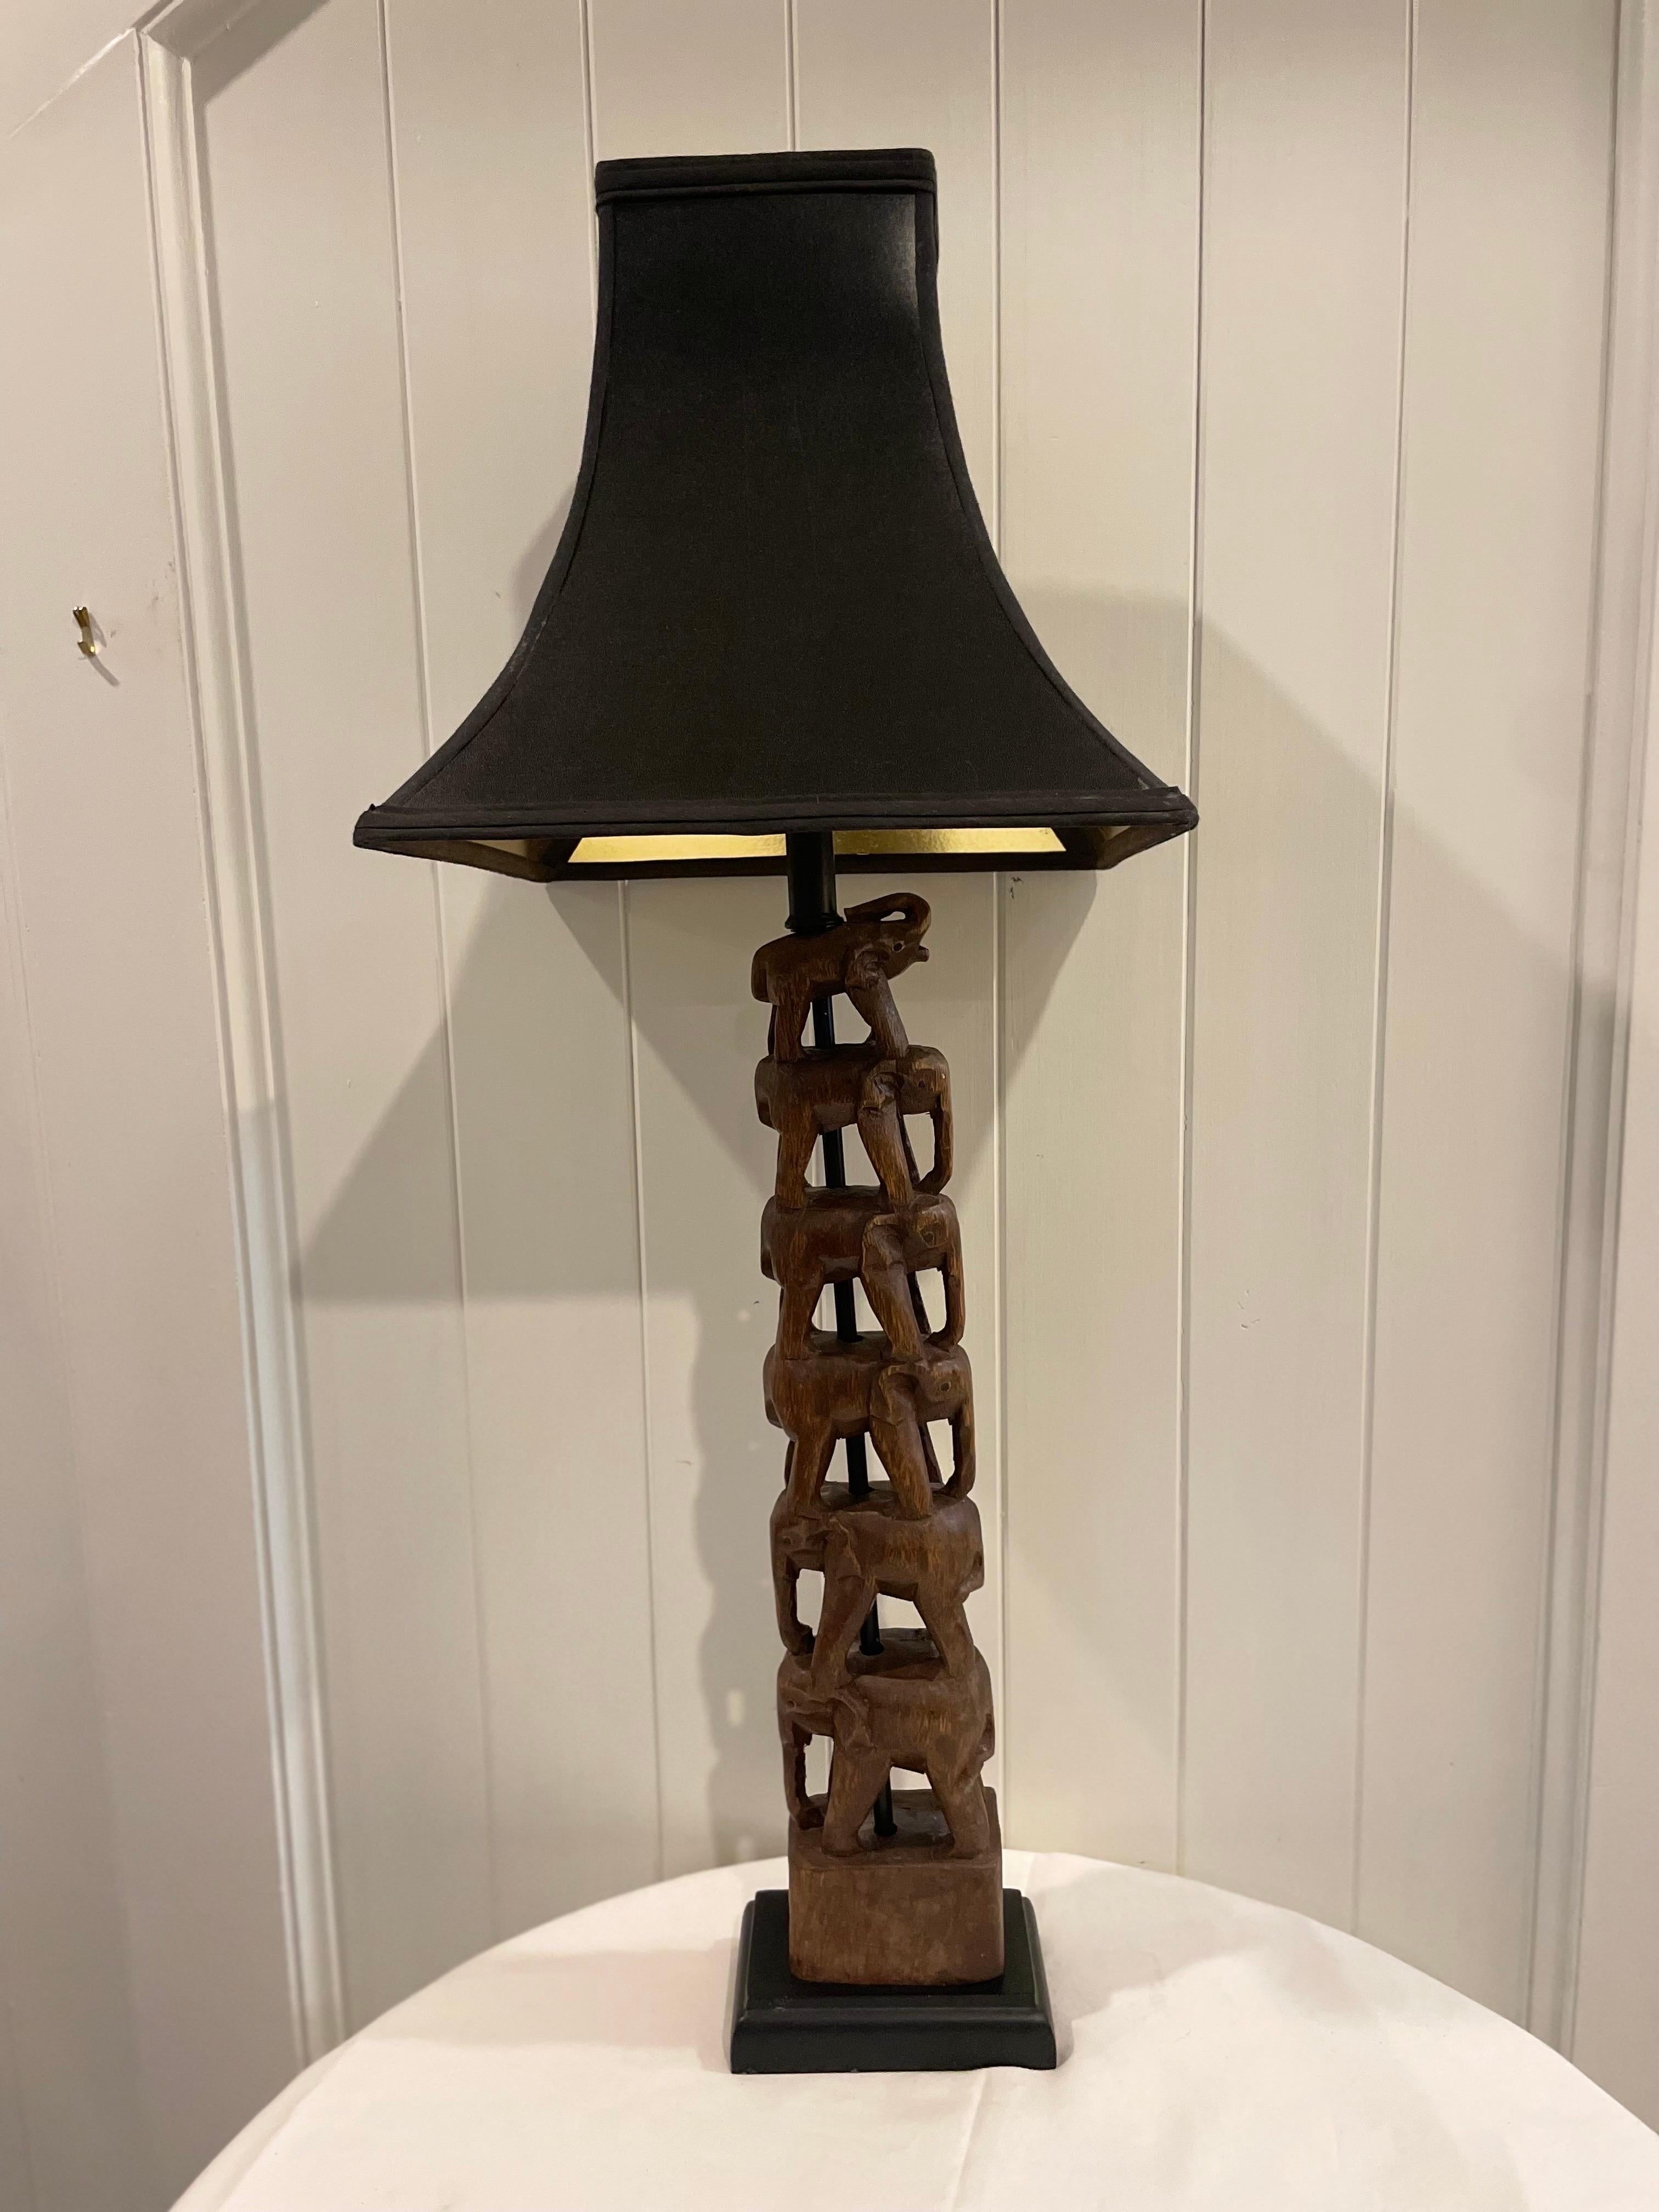 Gorgeous Carved Wood Stacked Elephant Lamp Attributed to Frederick Cooper Original wiring in working condition. Pretty Black shade with gold interior.